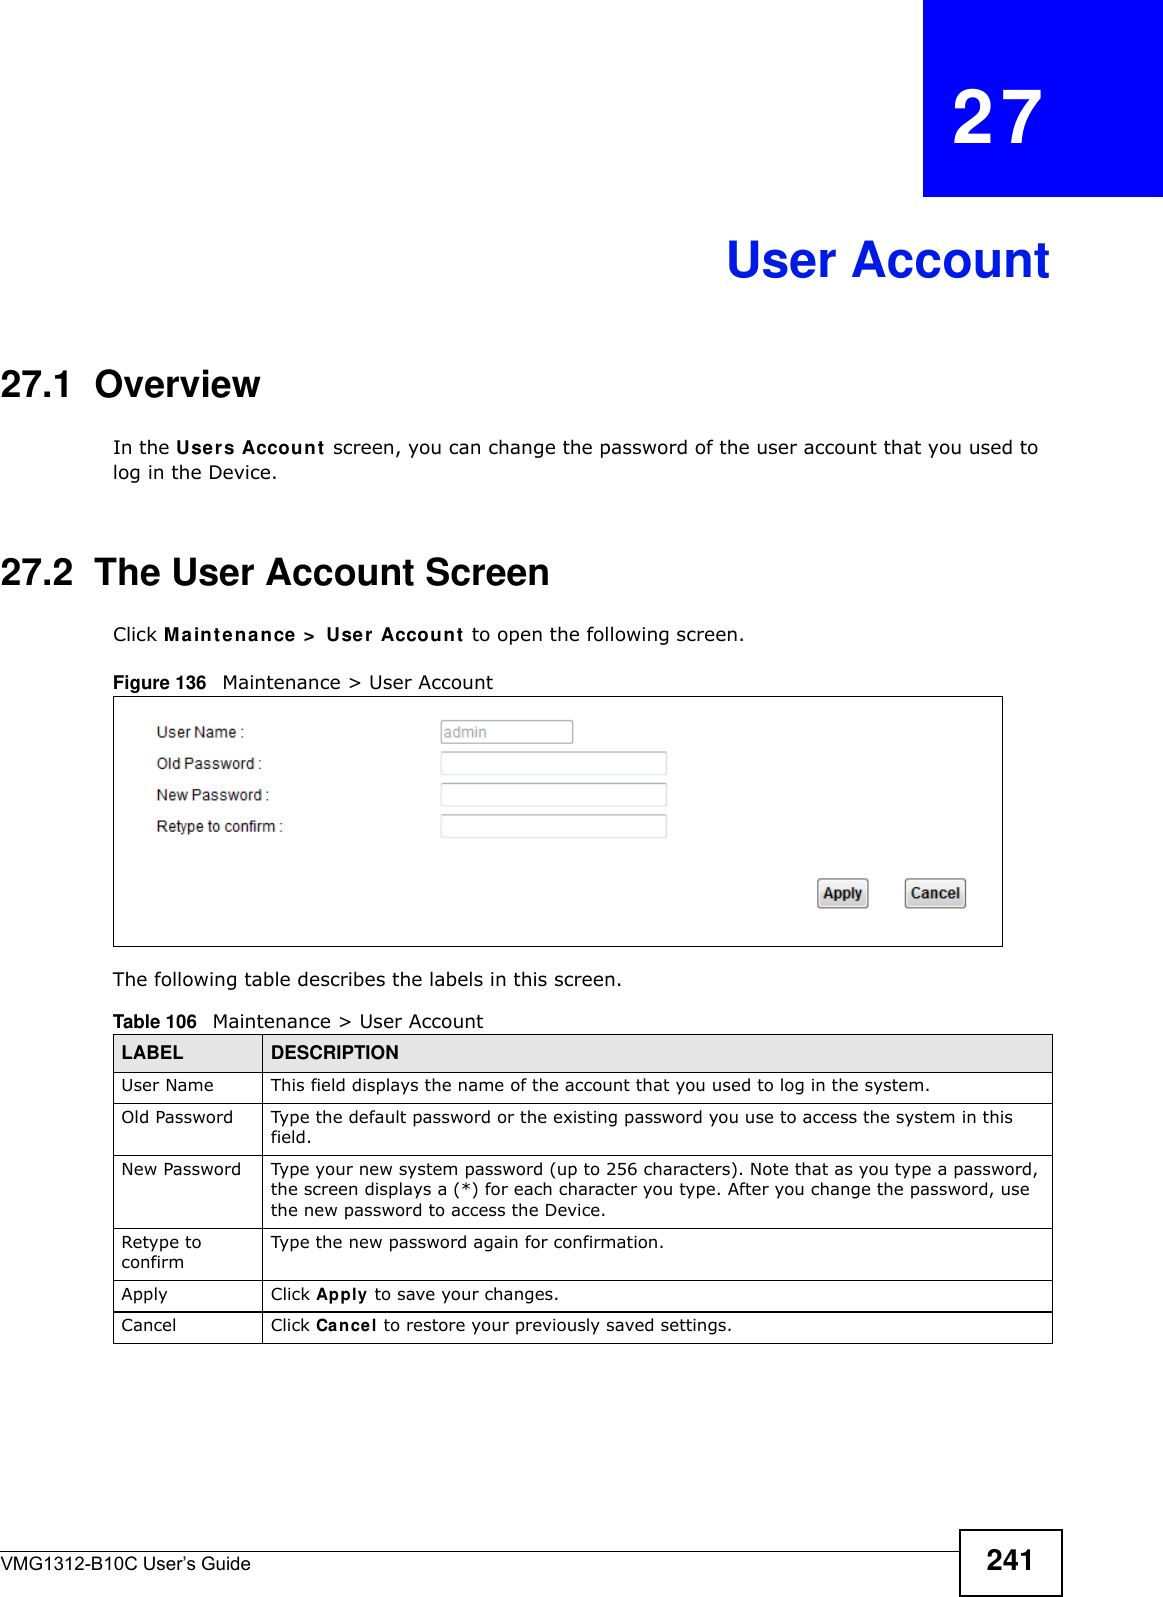 VMG1312-B10C User’s Guide 241CHAPTER   27User Account27.1  Overview In the Use r s Account  screen, you can change the password of the user account that you used to log in the Device. 27.2  The User Account ScreenClick M a in t e na n ce &gt;  User Accoun t  to open the following screen.Figure 136   Maintenance &gt; User AccountThe following table describes the labels in this screen. Table 106   Maintenance &gt; User AccountLABEL DESCRIPTIONUser Name This field displays the name of the account that you used to log in the system. Old Password Type the default password or the existing password you use to access the system in this field.New Password Type your new system password (up to 256 characters). Note that as you type a password, the screen displays a (*) for each character you type. After you change the password, use the new password to access the Device.Retype to confirmType the new password again for confirmation.Apply Click Apply to save your changes.Cancel Click Can cel to restore your previously saved settings.